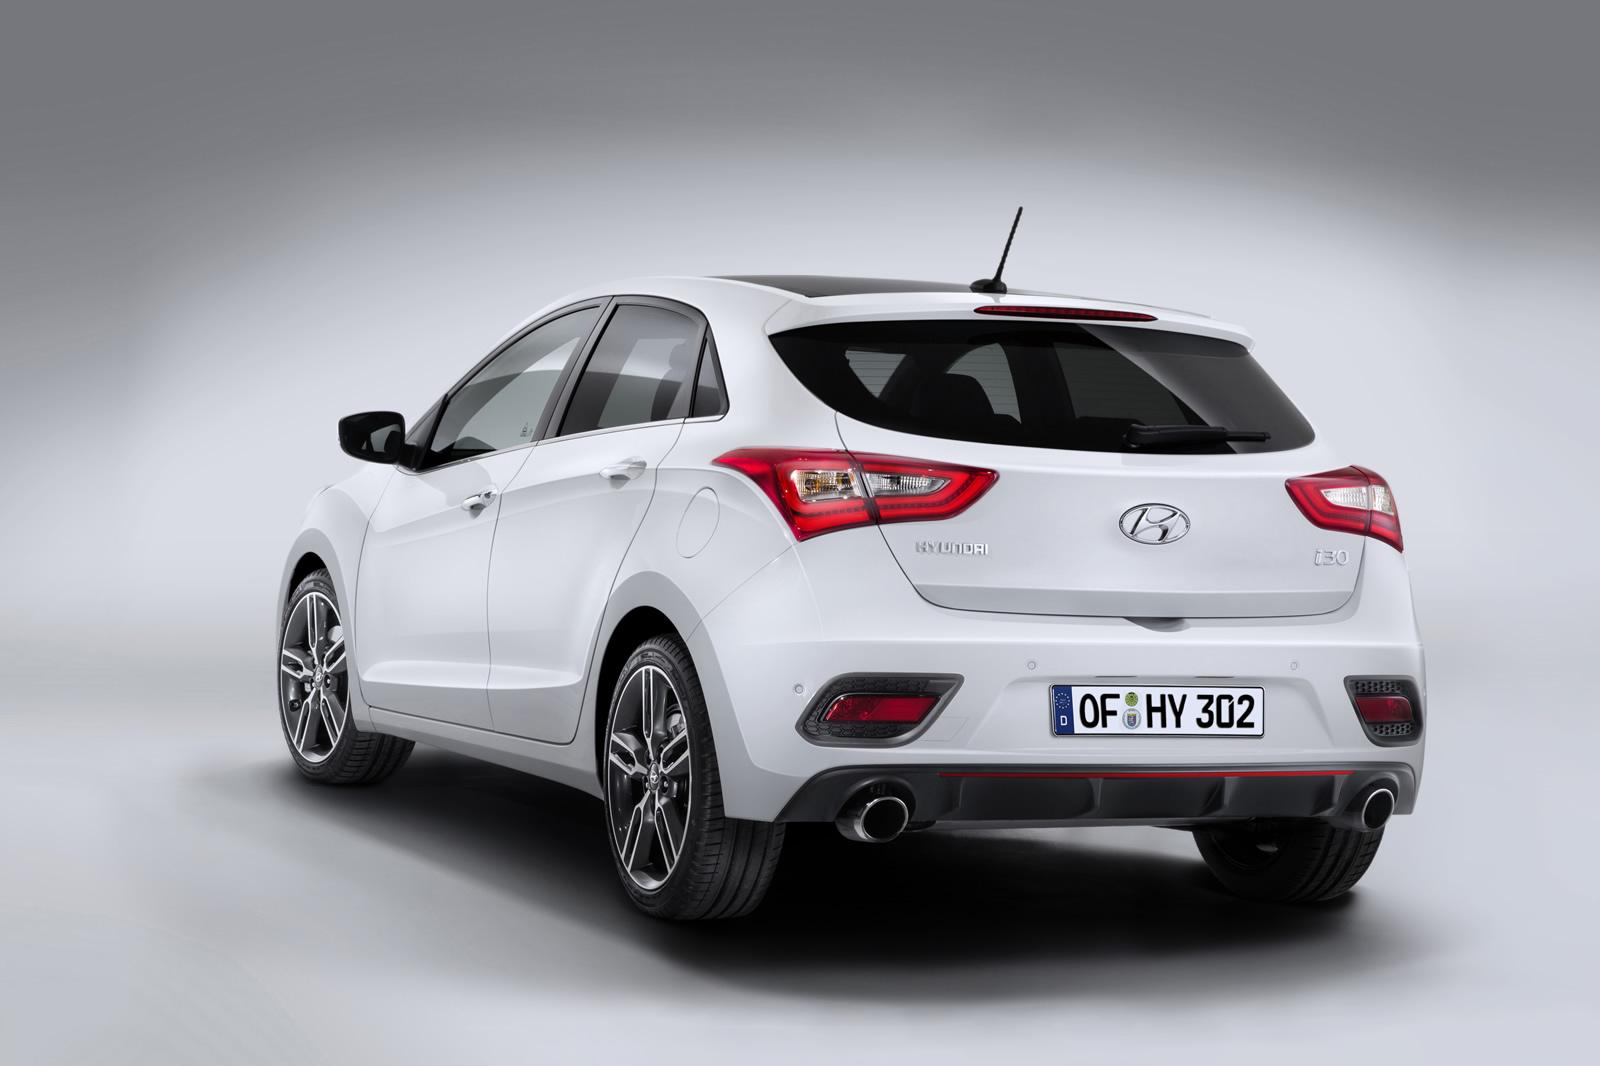 New Hyundai i30 Turbo Launched in the UK with 186 HP